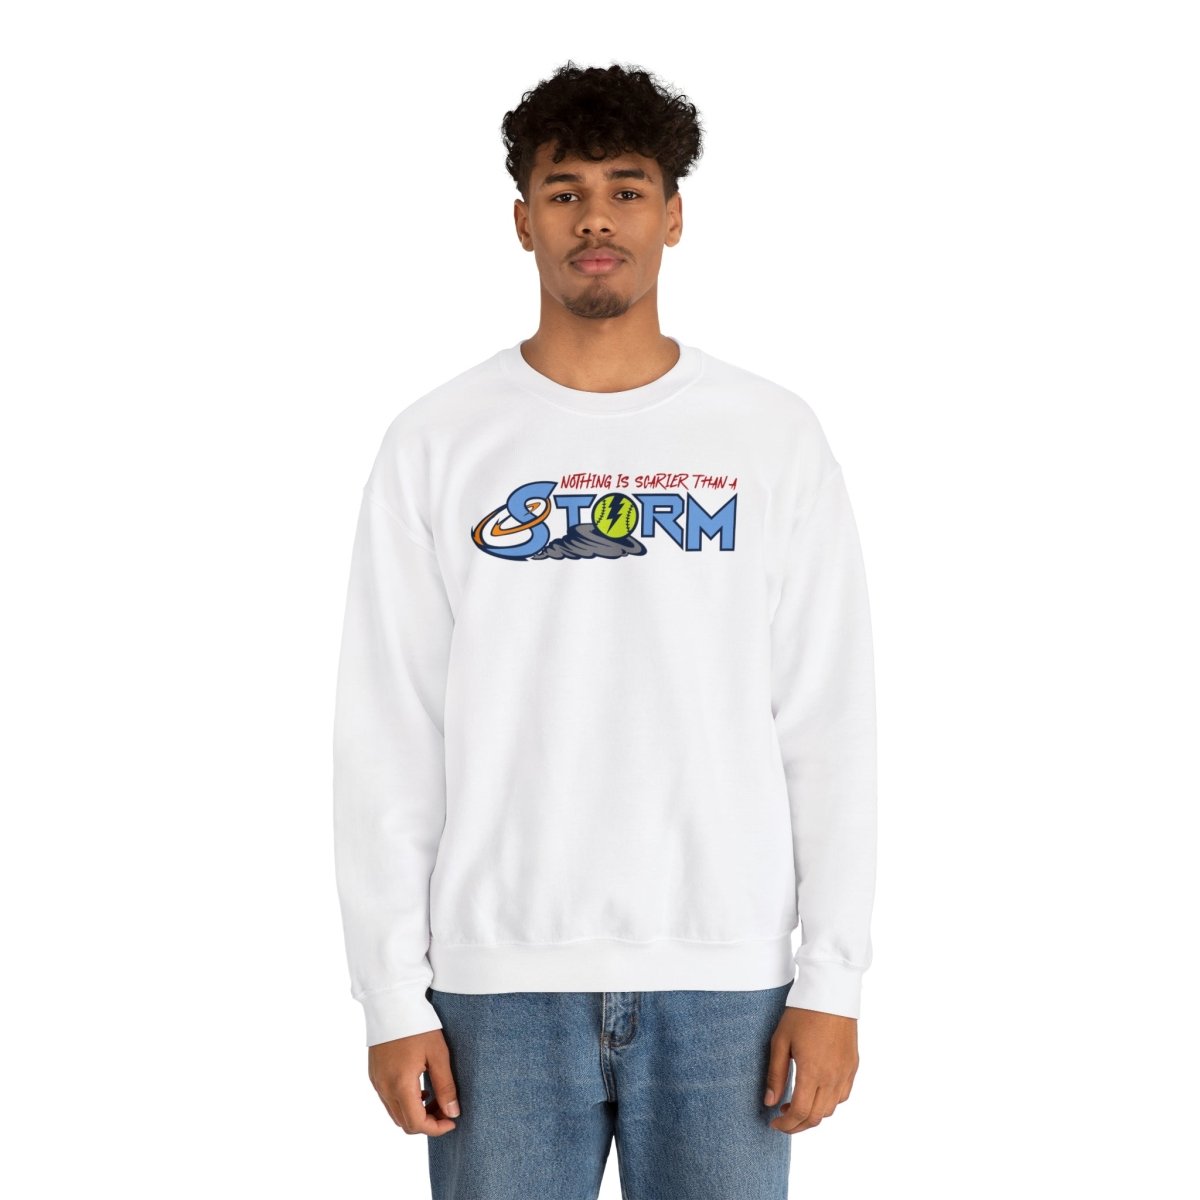 Nothing Is Scarier Cotton Sweatshirt